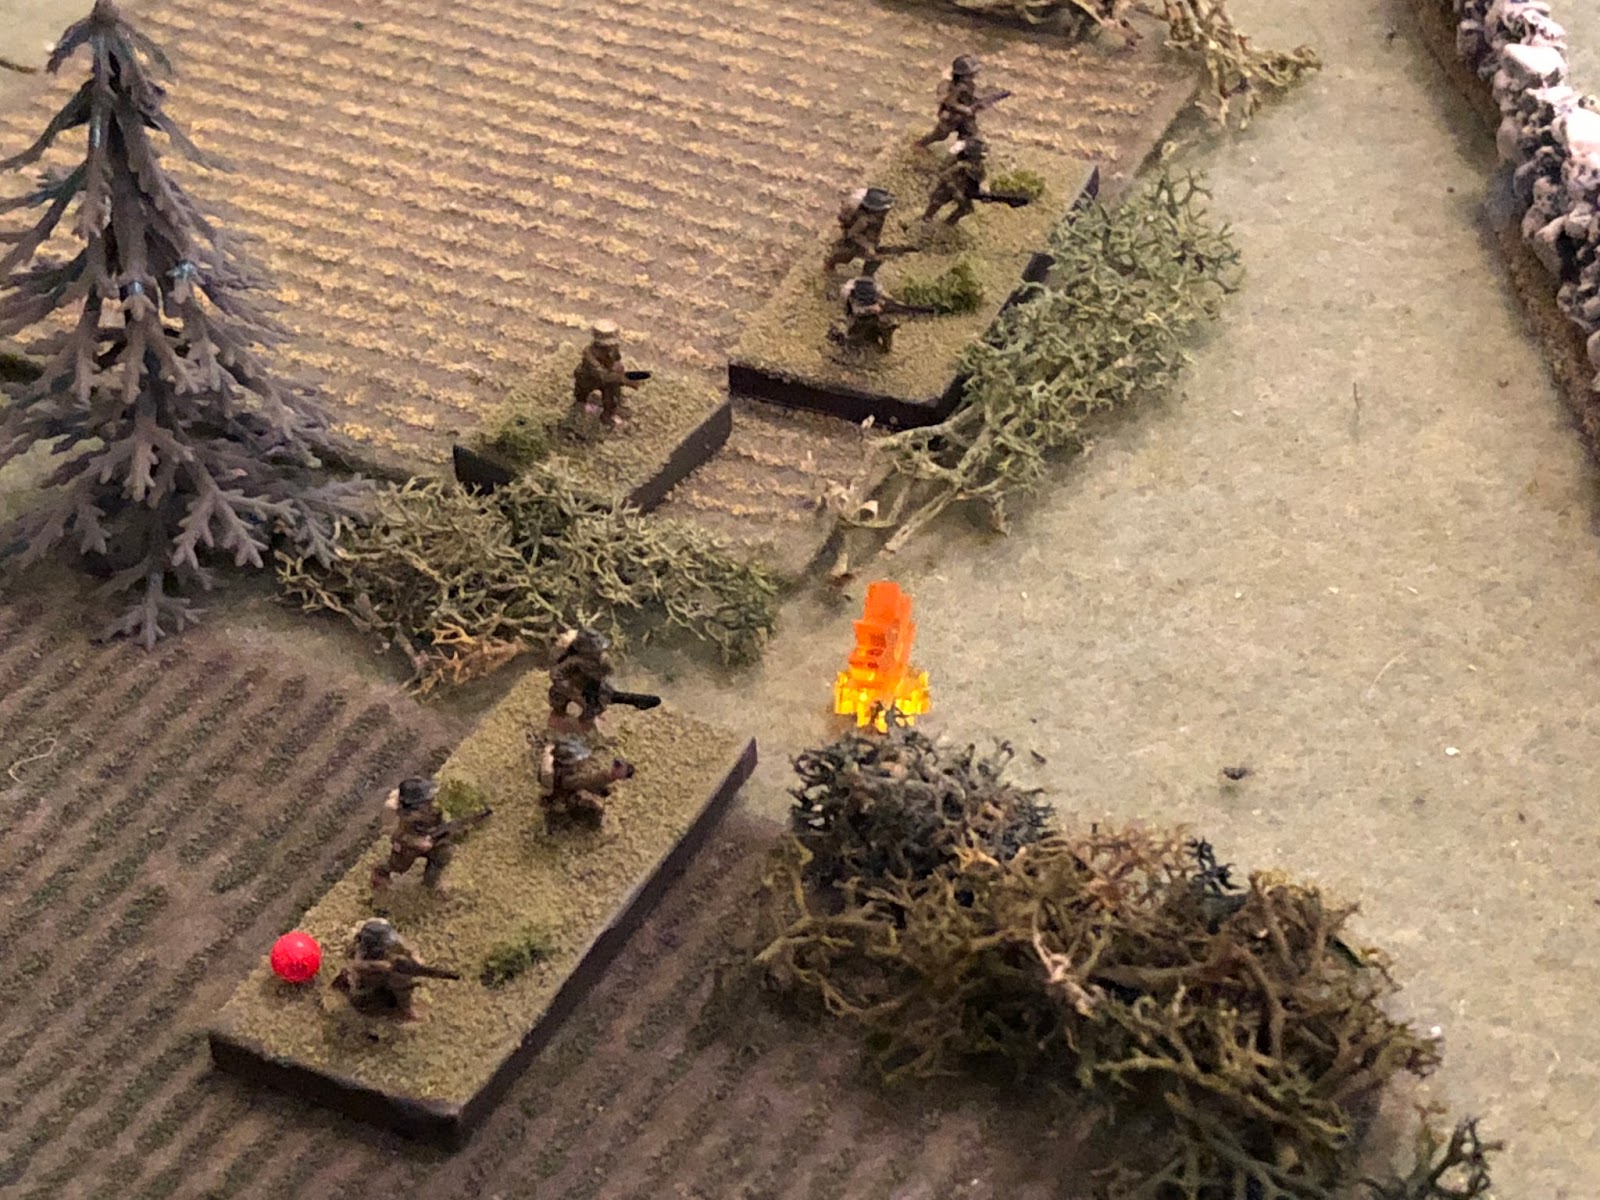  And SSgt Sachs' fire manages to suppress one of the enemy squads. 